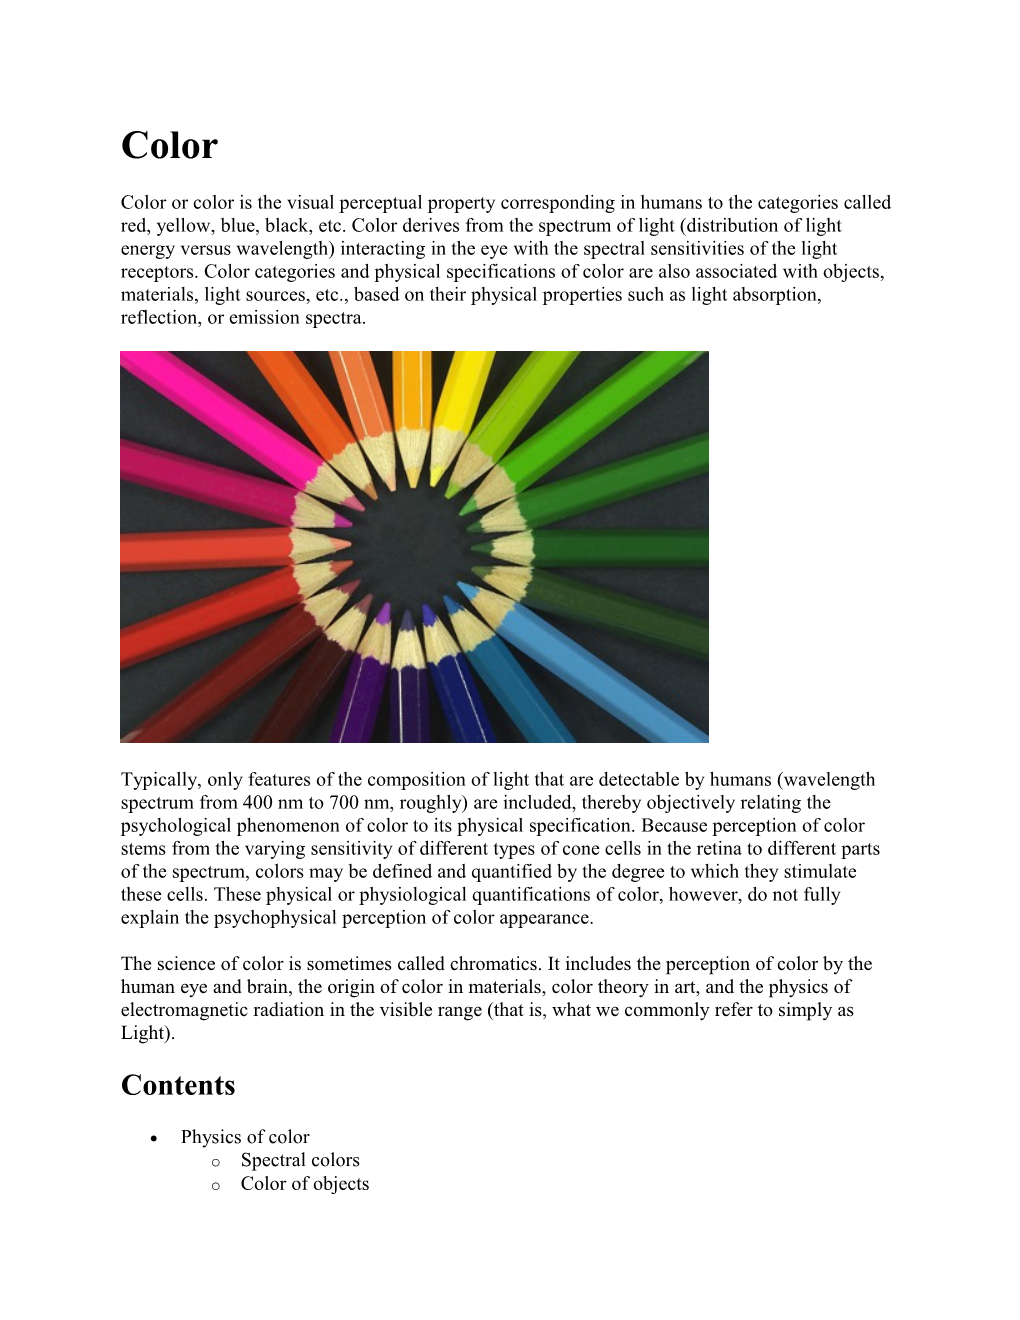 Color Or Color Is the Visual Perceptual Property Corresponding in Humans to the Categories